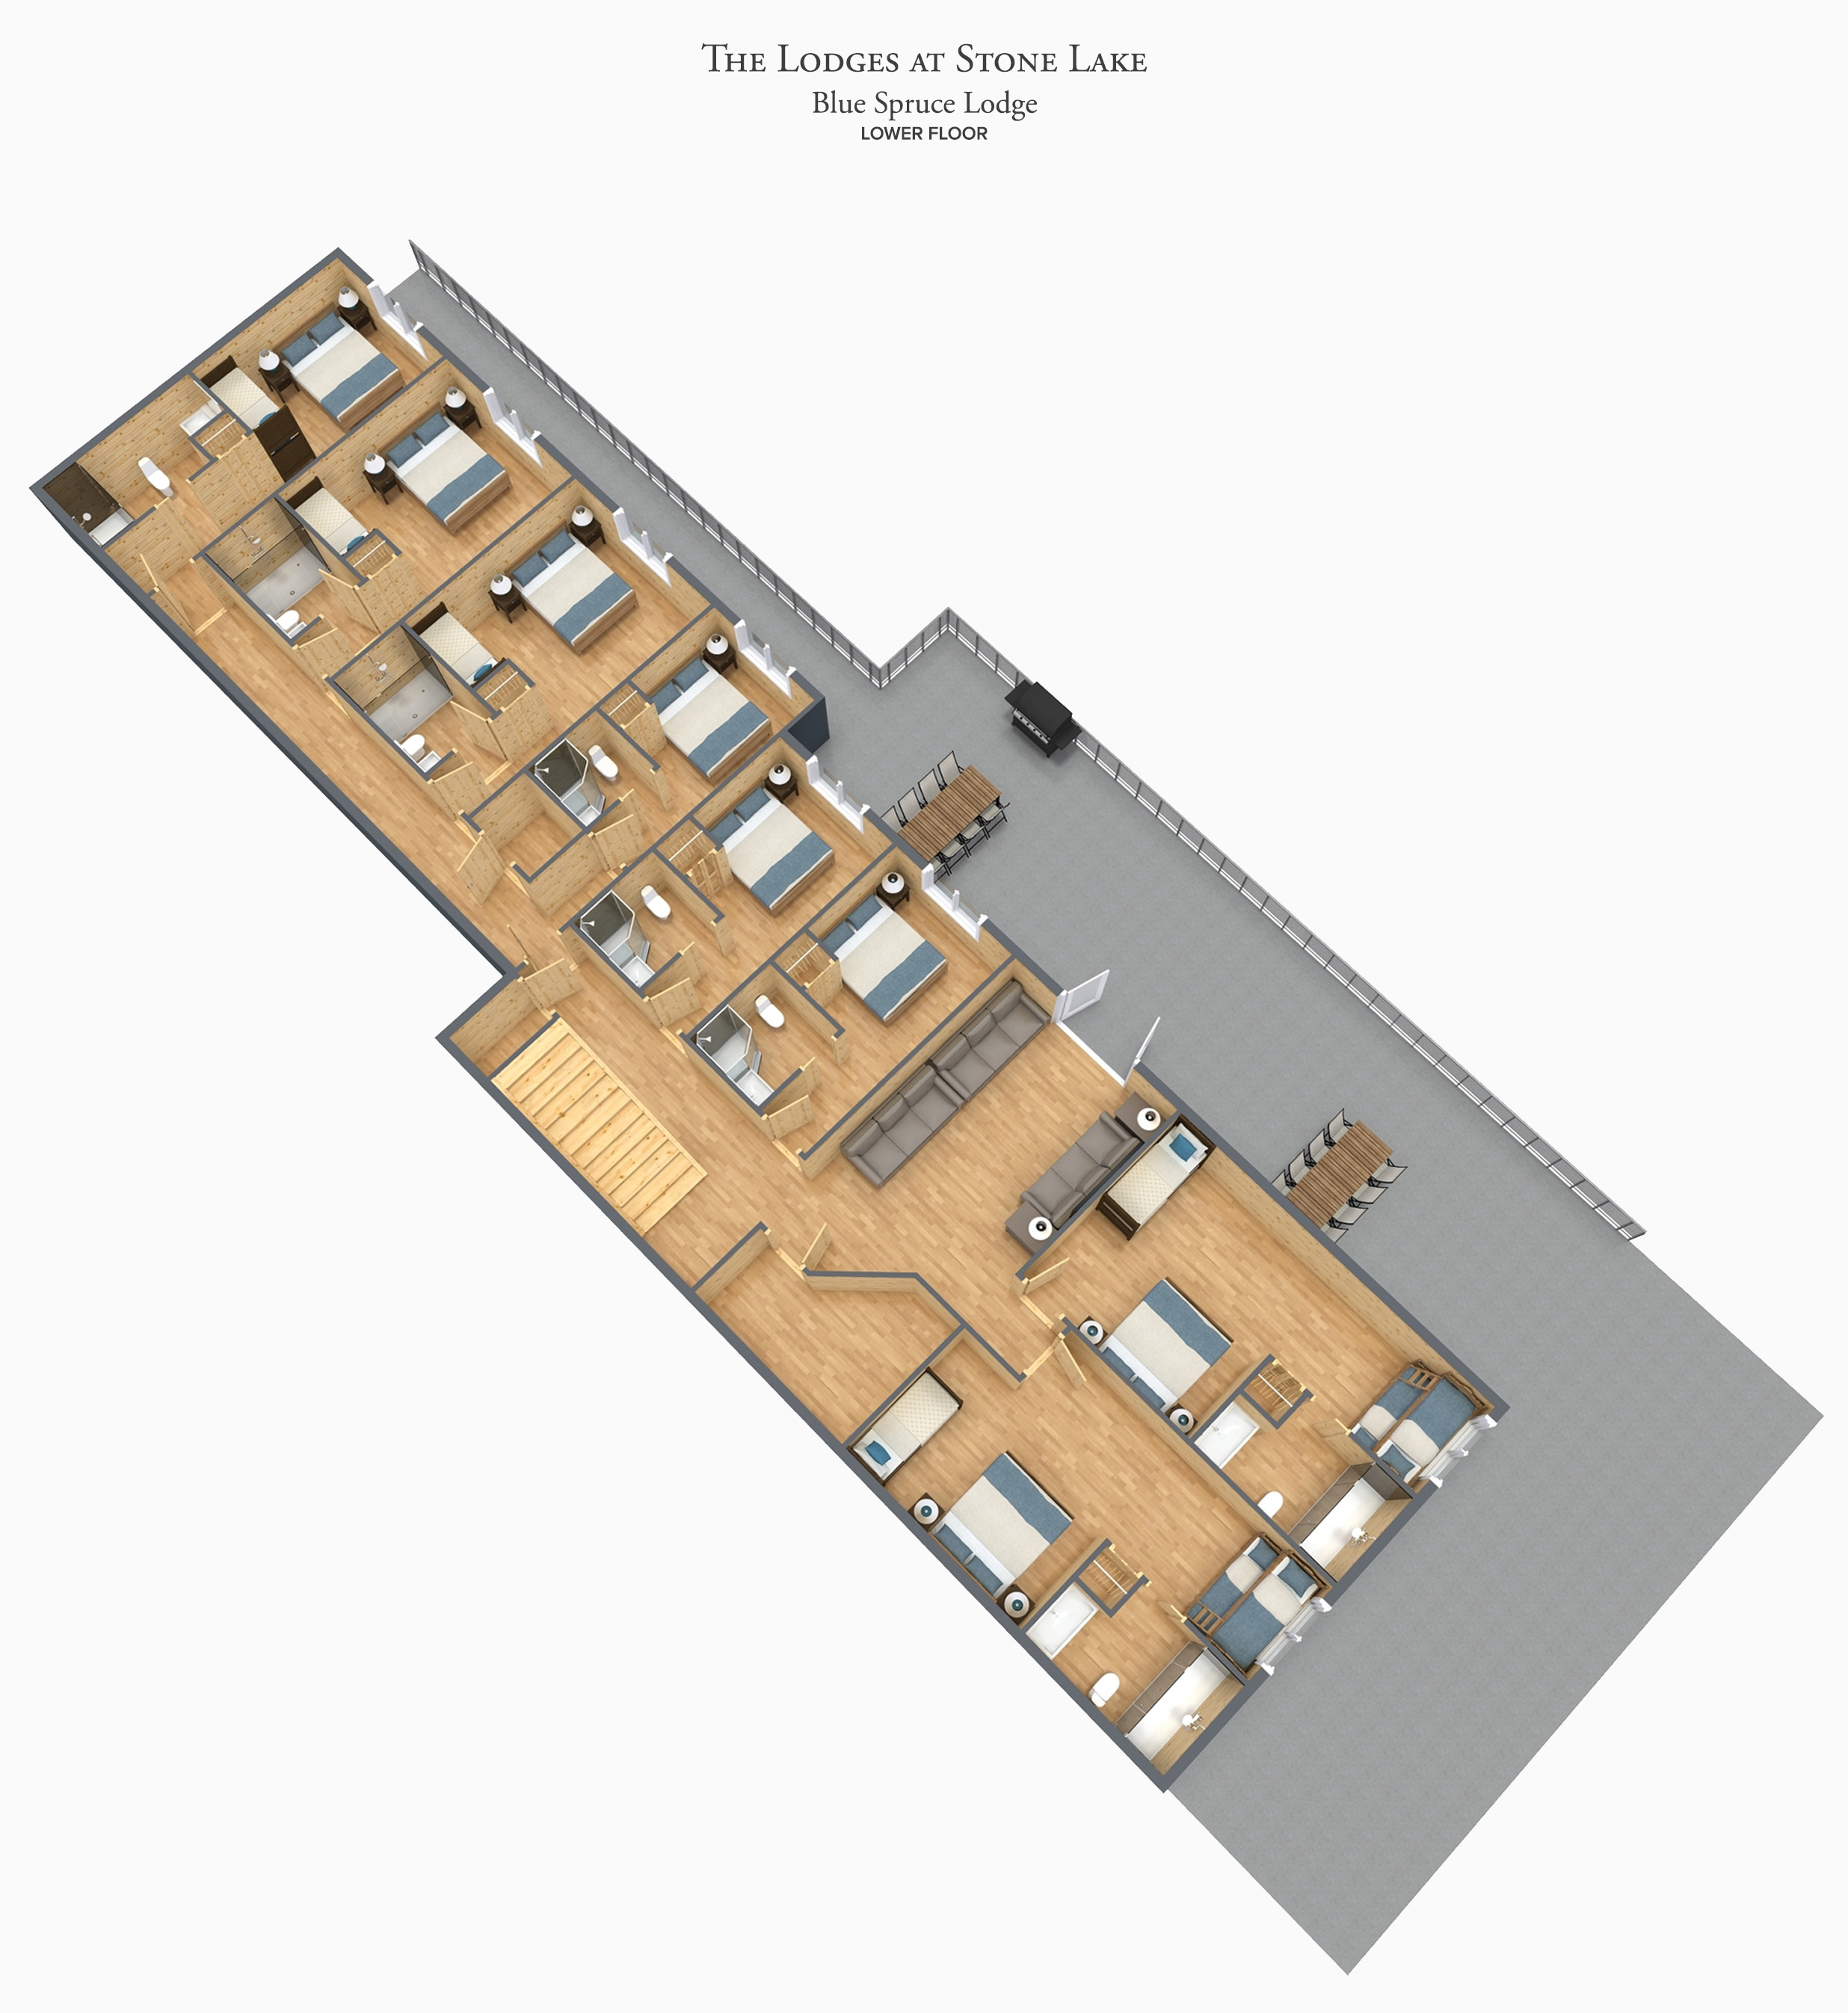 Blue Spruce - Lower Level Floor Plan - The Lodges at Stone Lake.jpg